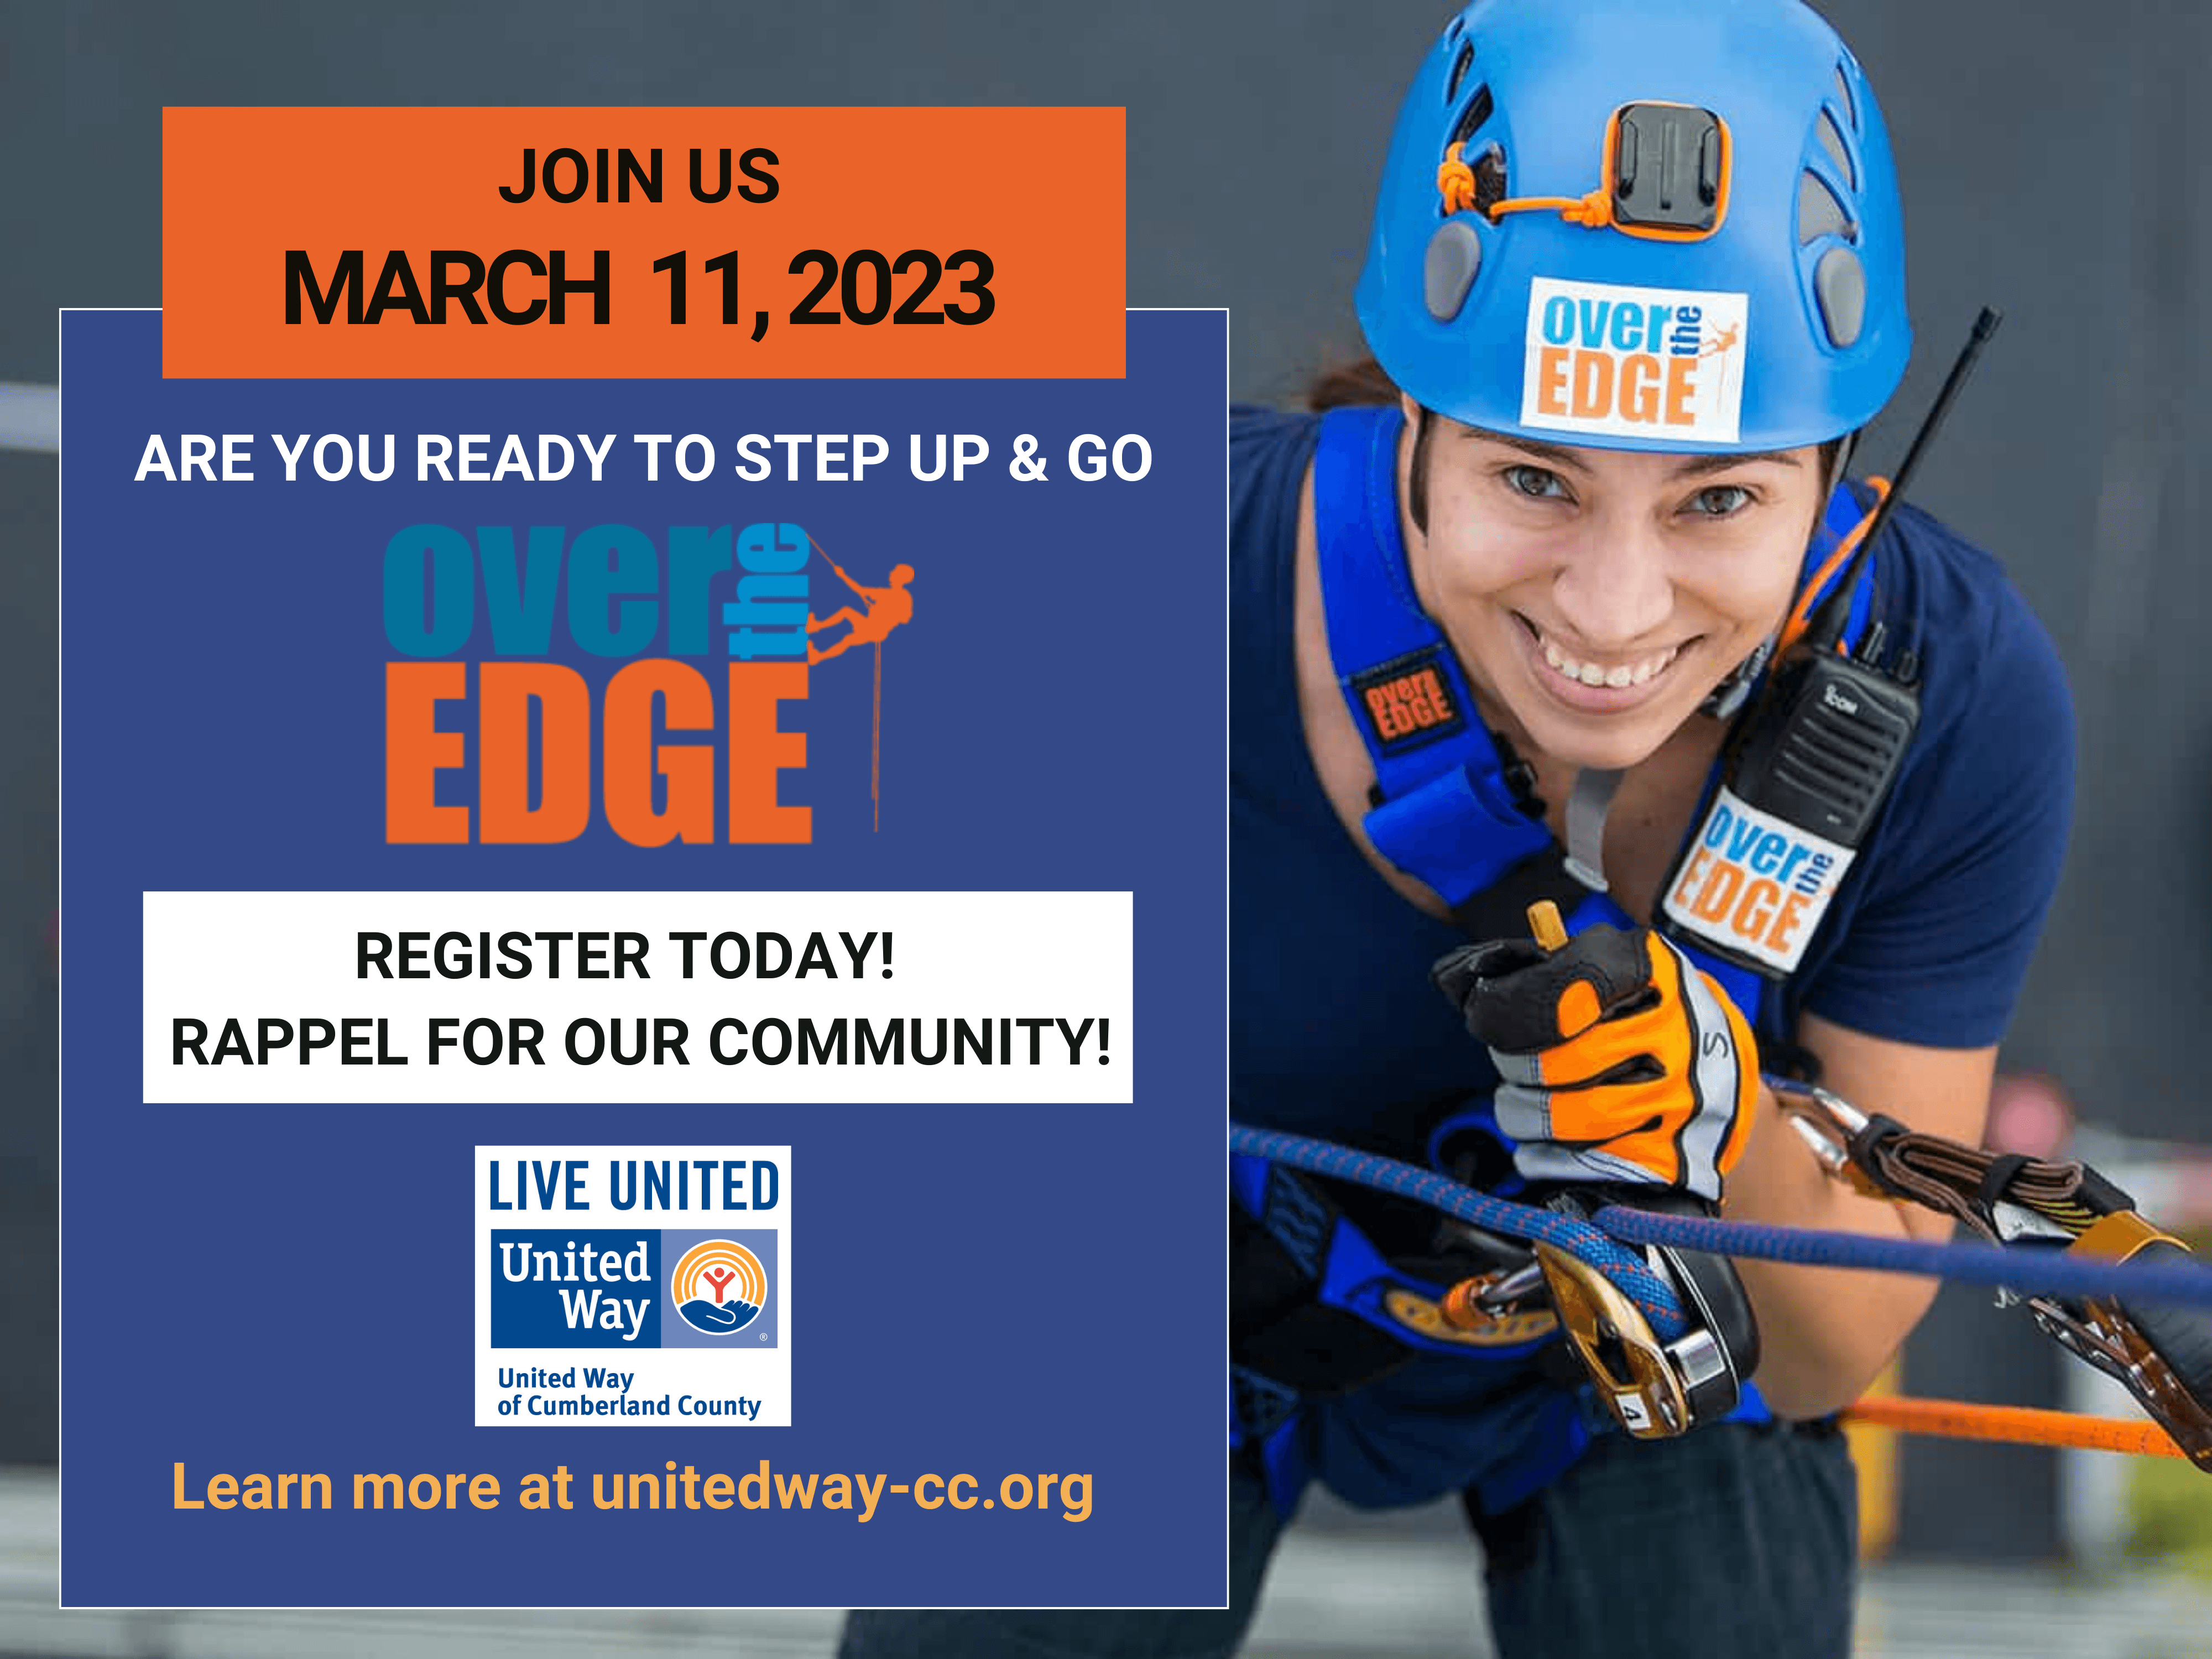 ARE YOU READY TO STEP OVER THE EDGE FOR OUR COMMUNITY?